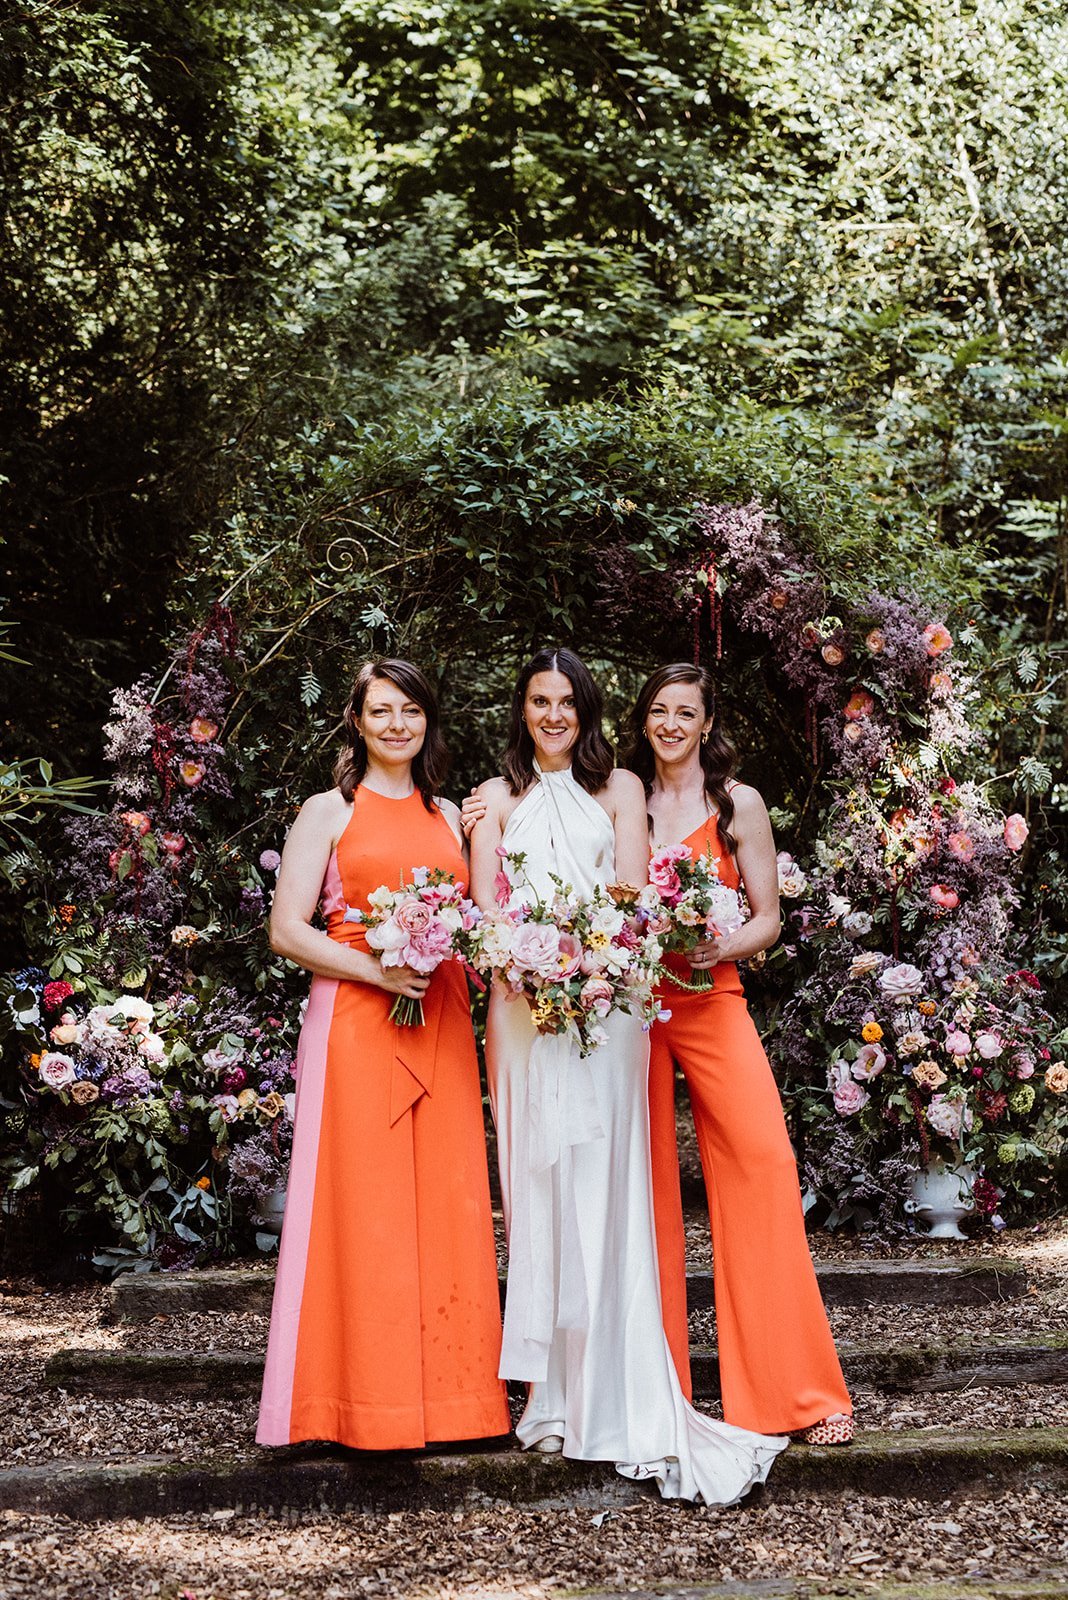 Beautiful bride Tallulah wore a wedding dress by Halfpenny London on her big day